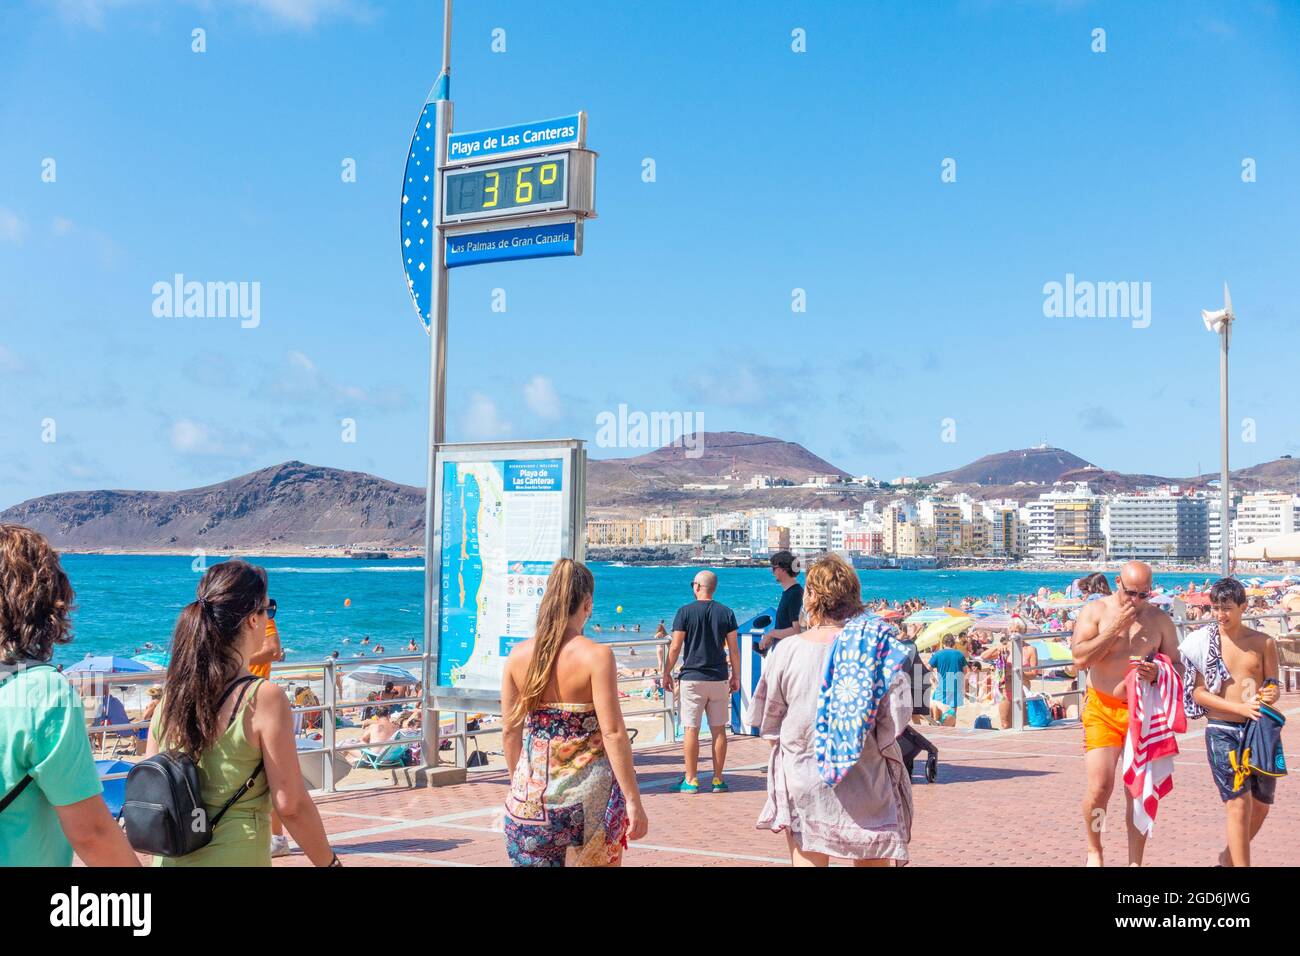 Las Palmas, Gran Canaria, Canary Islands, Spain. 11th August, 2021.  Tourists, many British, basking on a packed city beach in Las Palmas as  temperature hit 36 degrees on Gran Canaria. Temperatures are